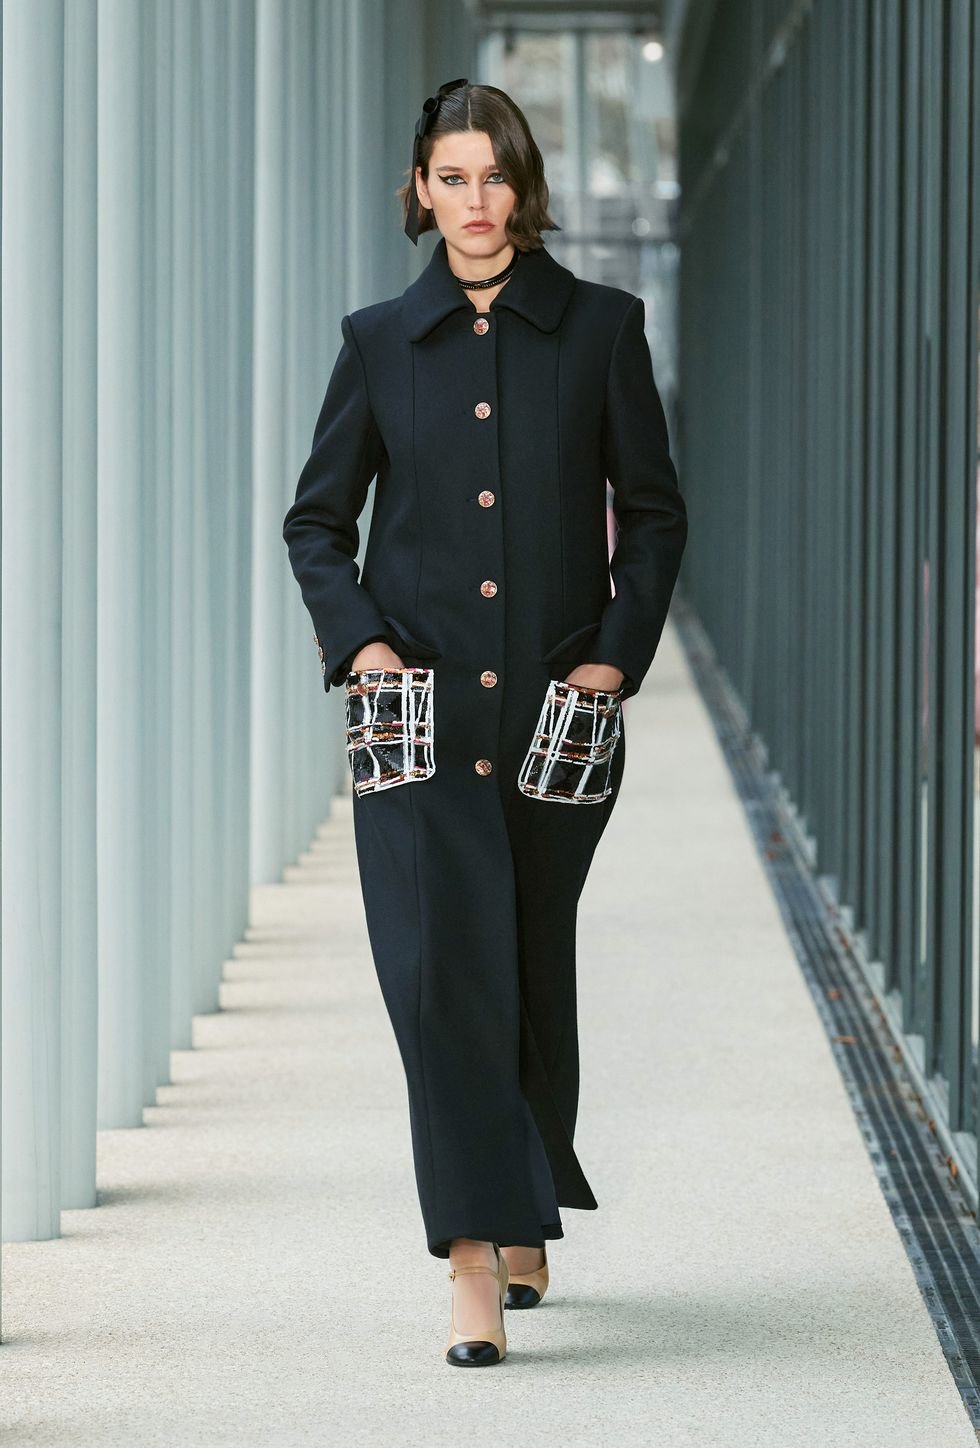 Model wearing Chanel Métiers d'art 2021/22 collection